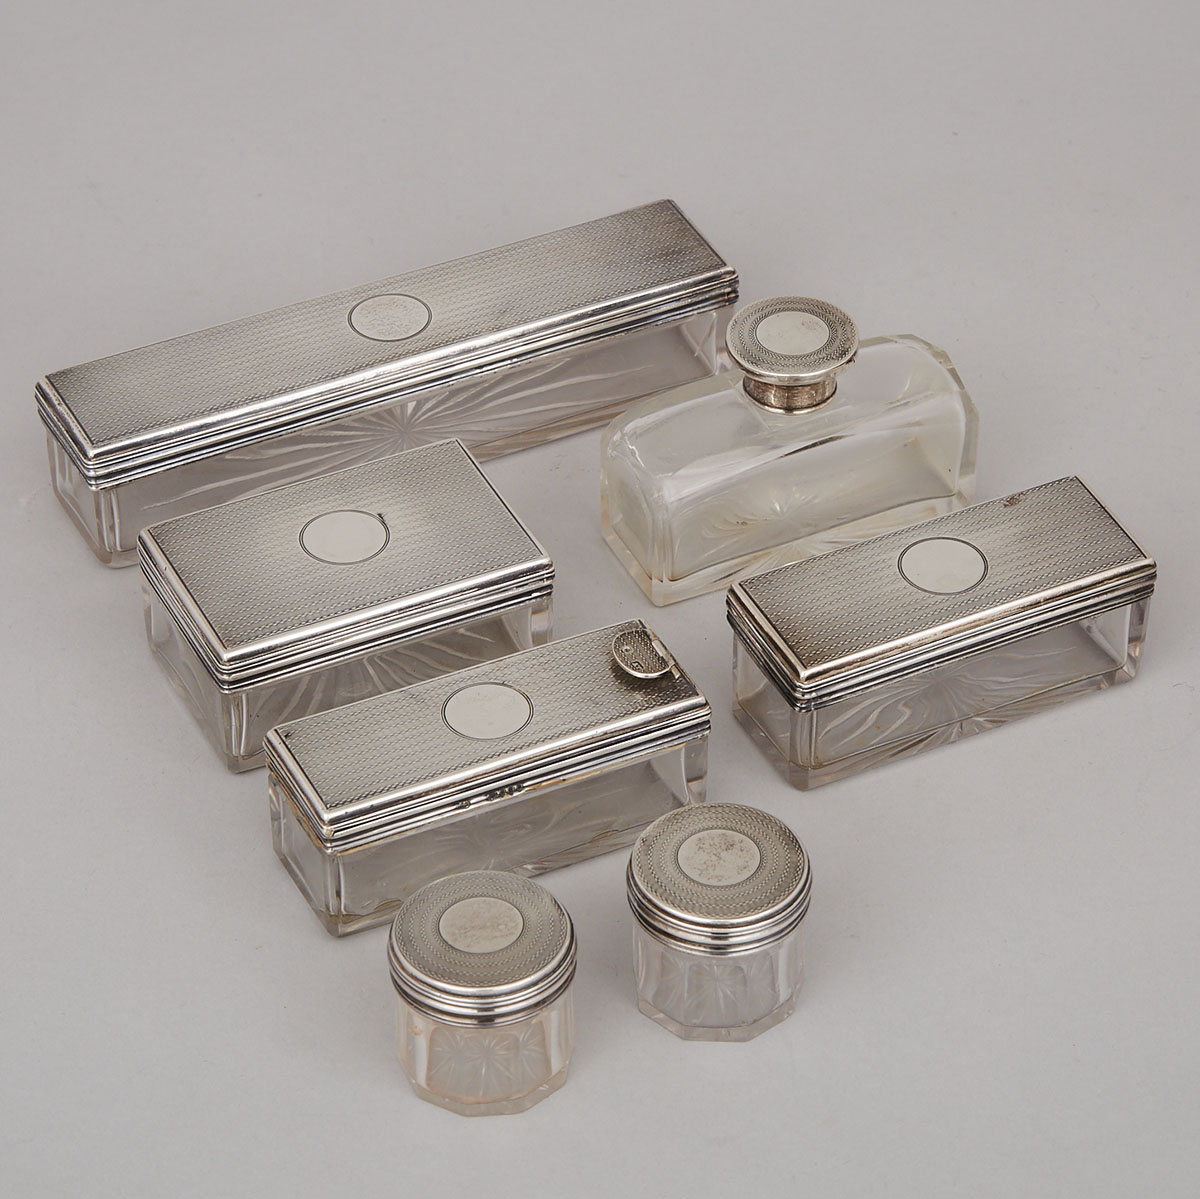 Seven Victorian Silver Mounted Cut Glass Toilet Boxes and Jars, James Vickery, London, 1852